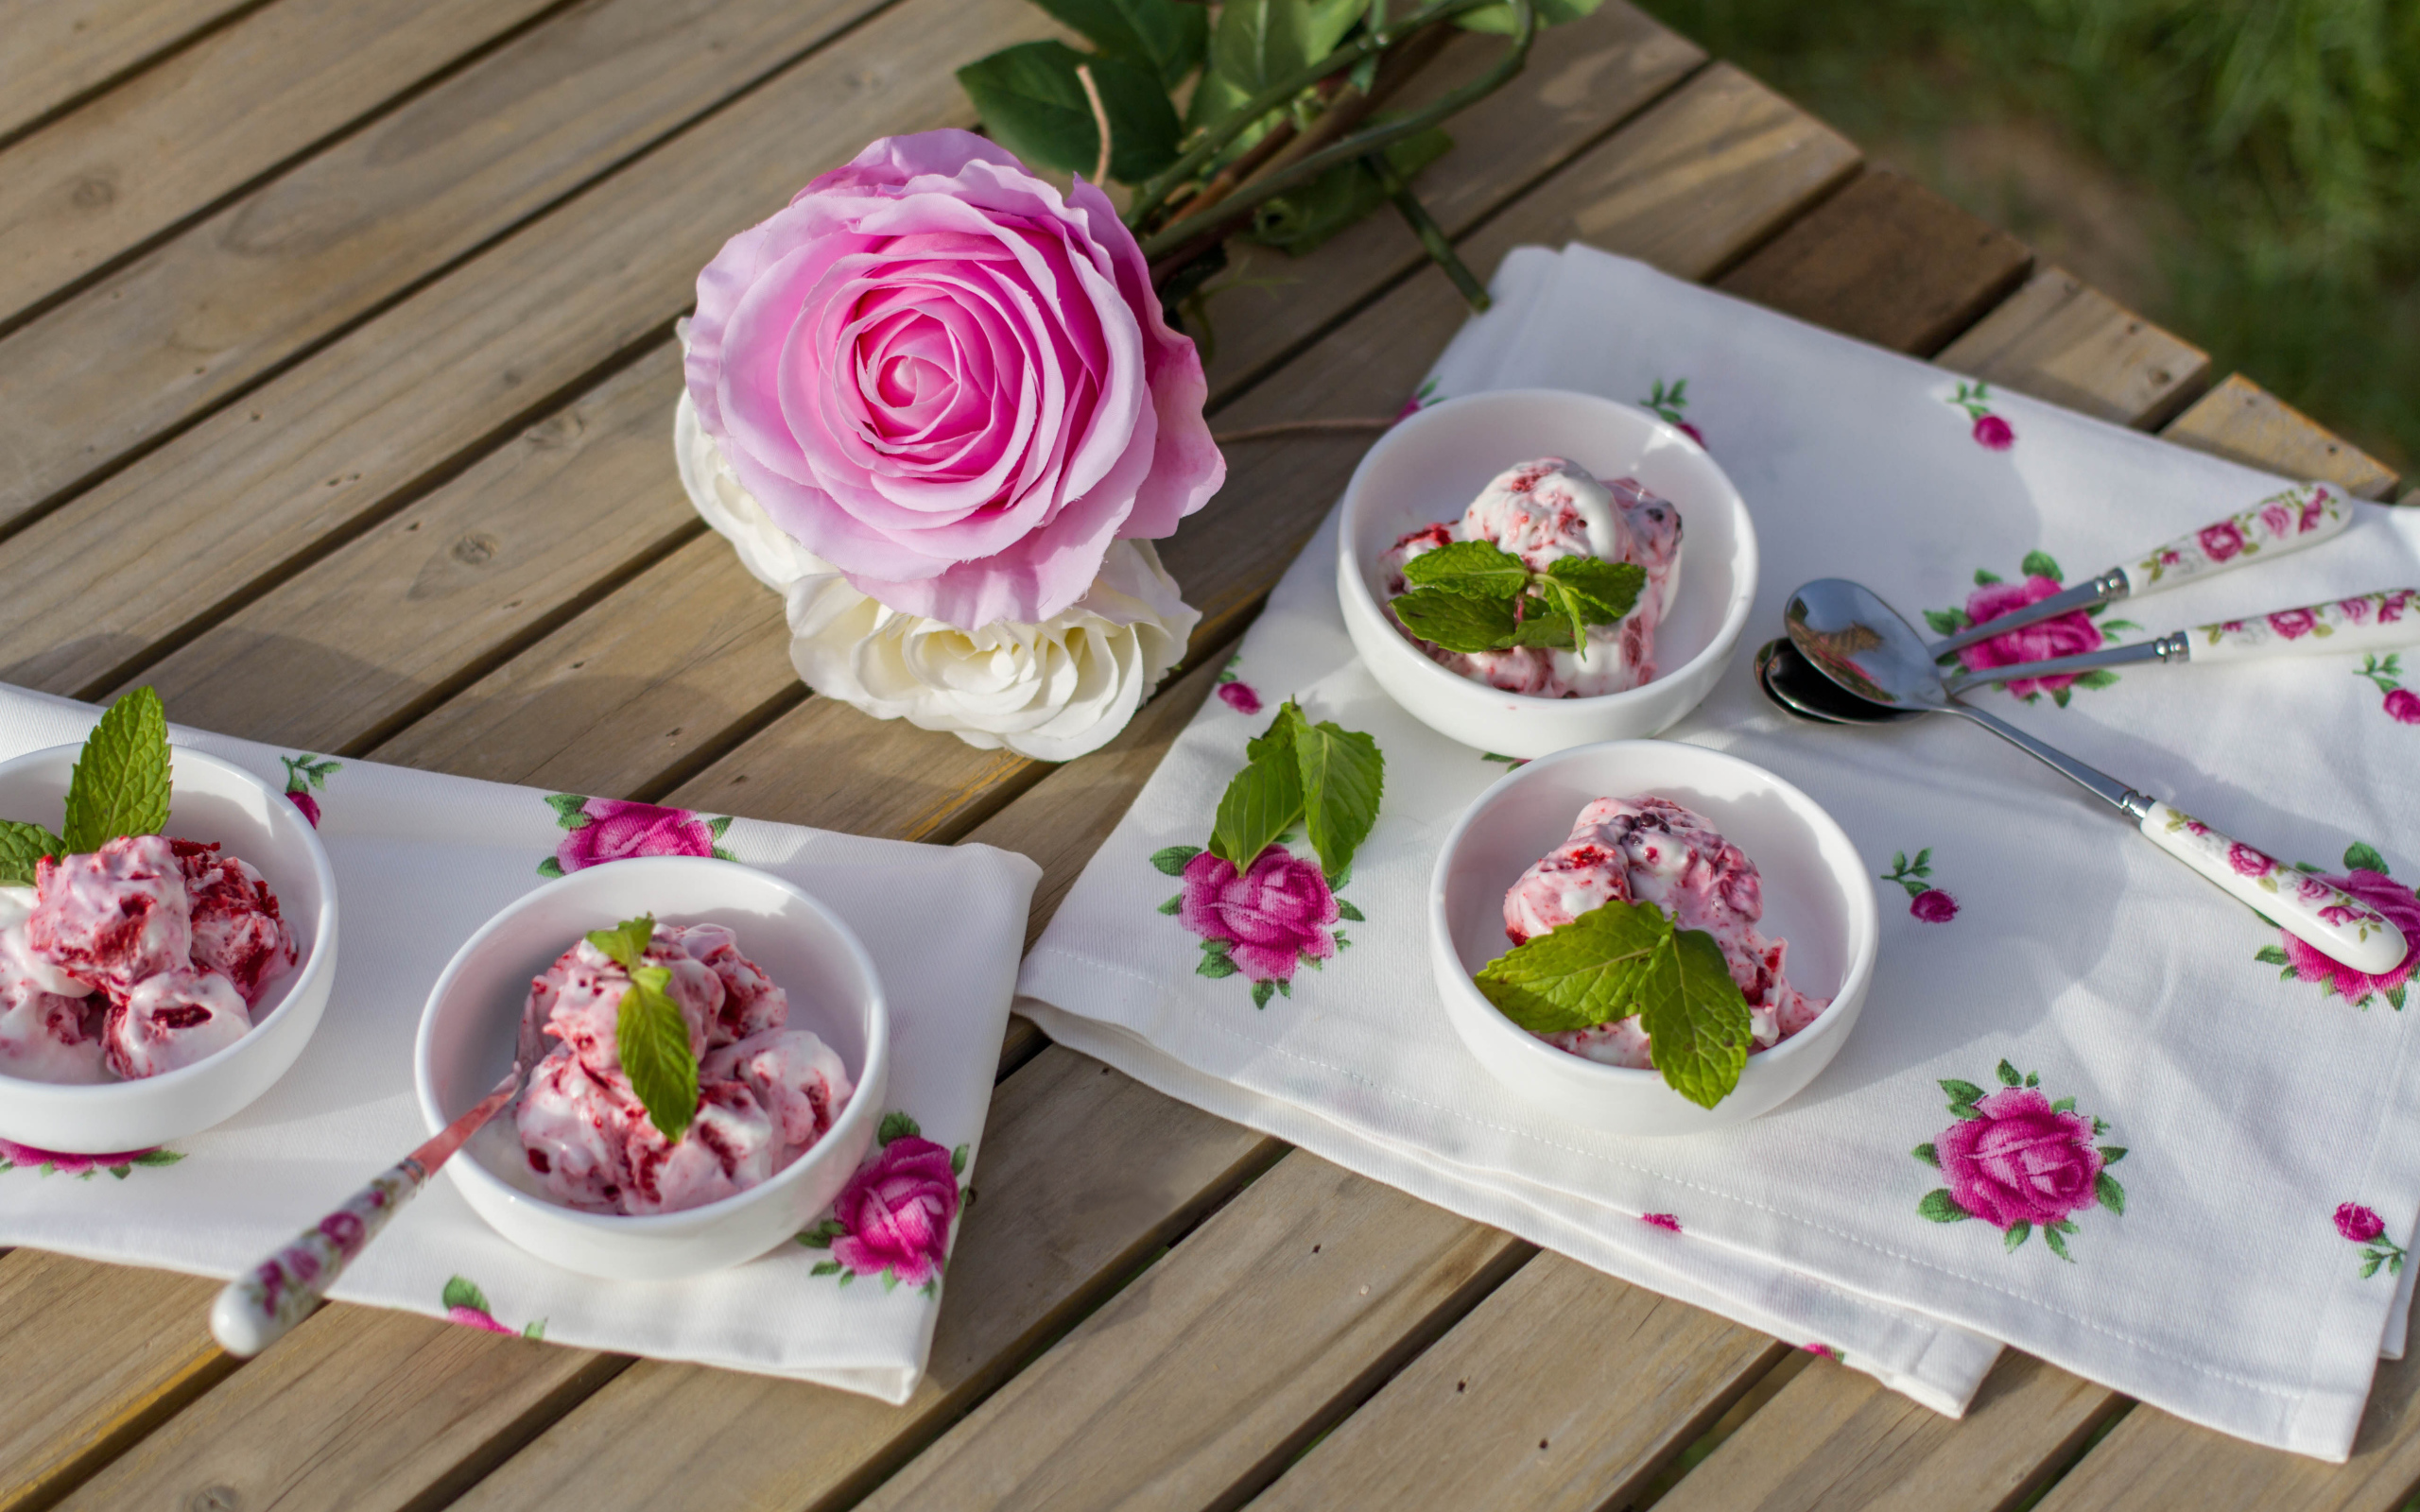 Ice cream on a table with a pink rose